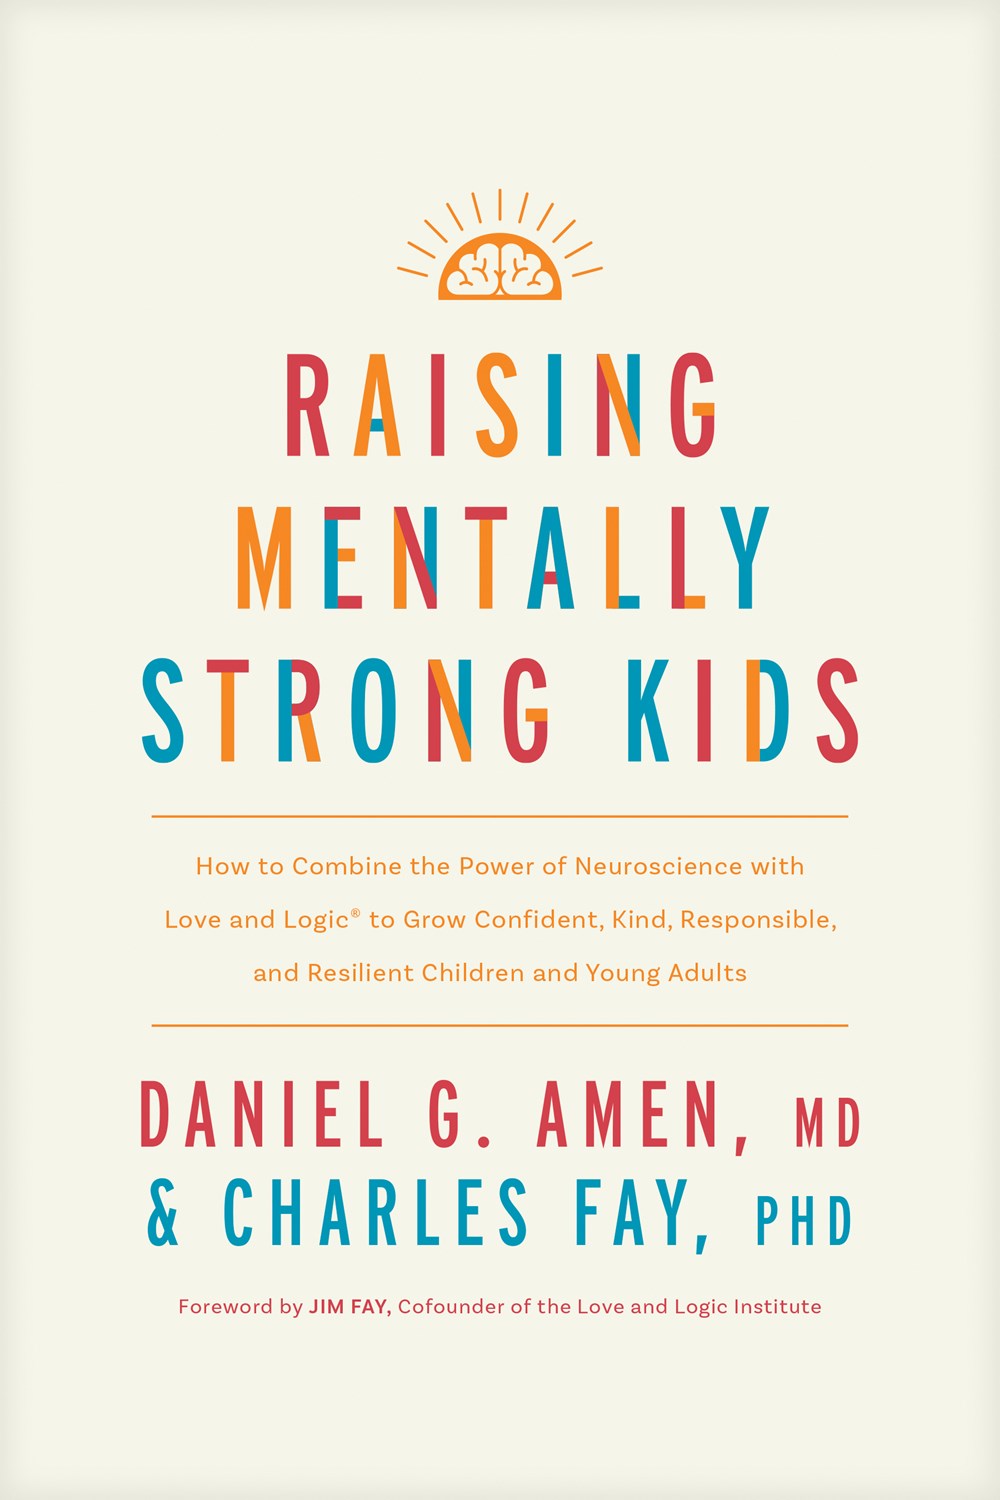 Raising Mentally Strong Kids: How To Combine the Power of Neuroscience with Love and Logic To Grow Confident, Kind, Responsible, and Resilient Children and Young Adults